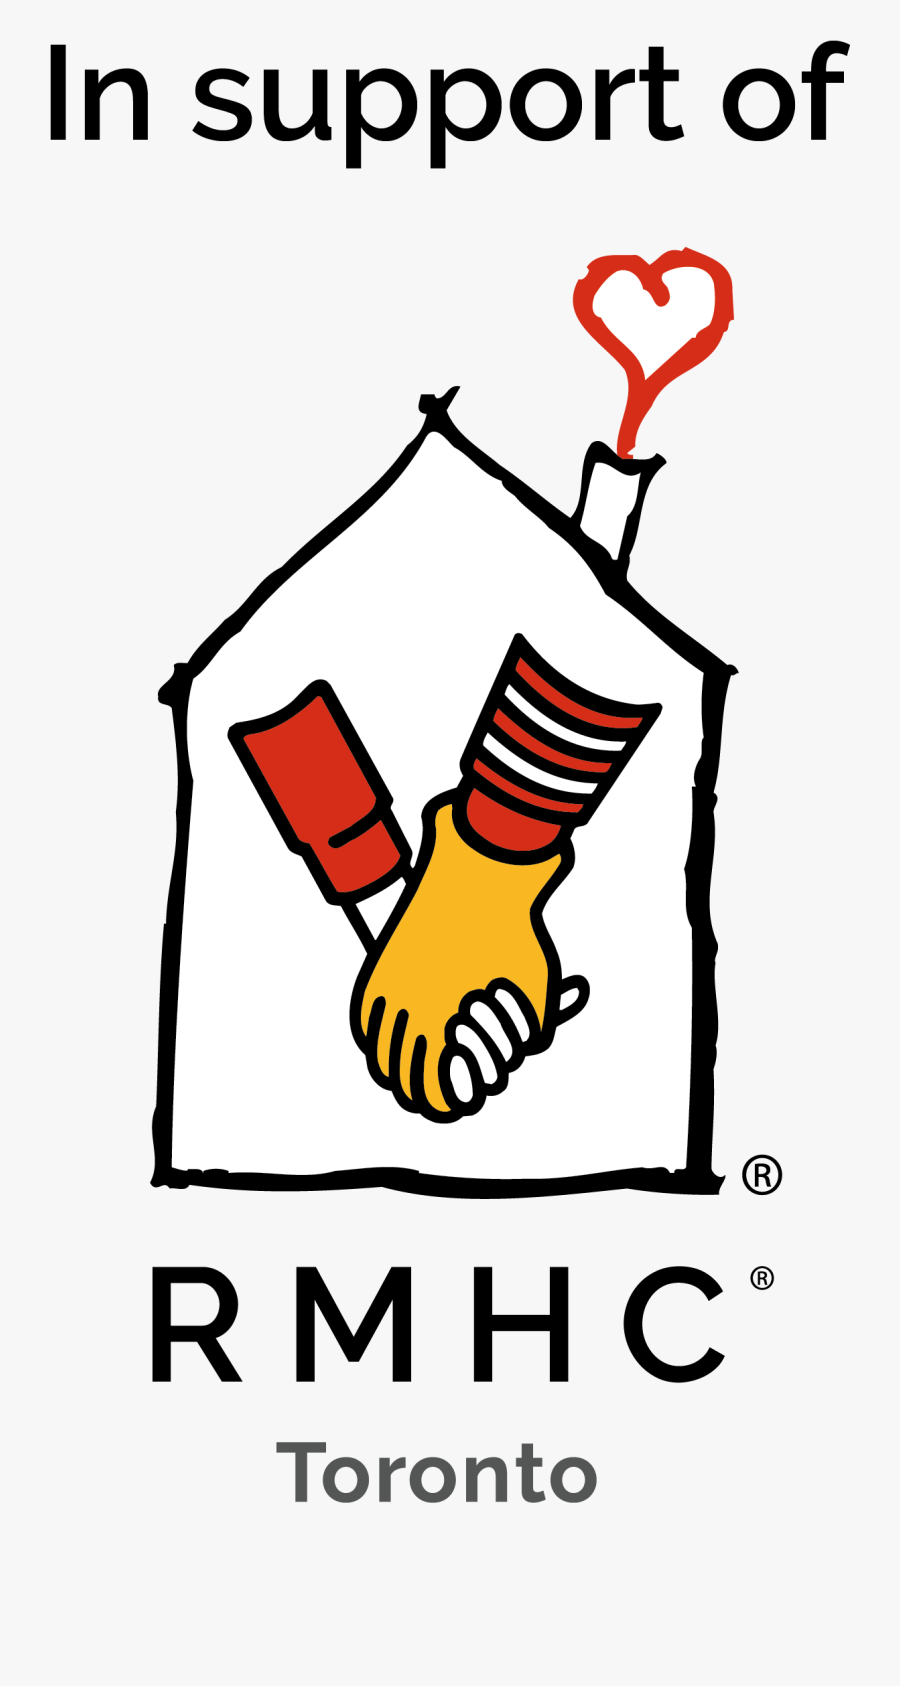 Whiterose Janitorial Services Ltd - Ronald Mcdonald House Charities, Transparent Clipart